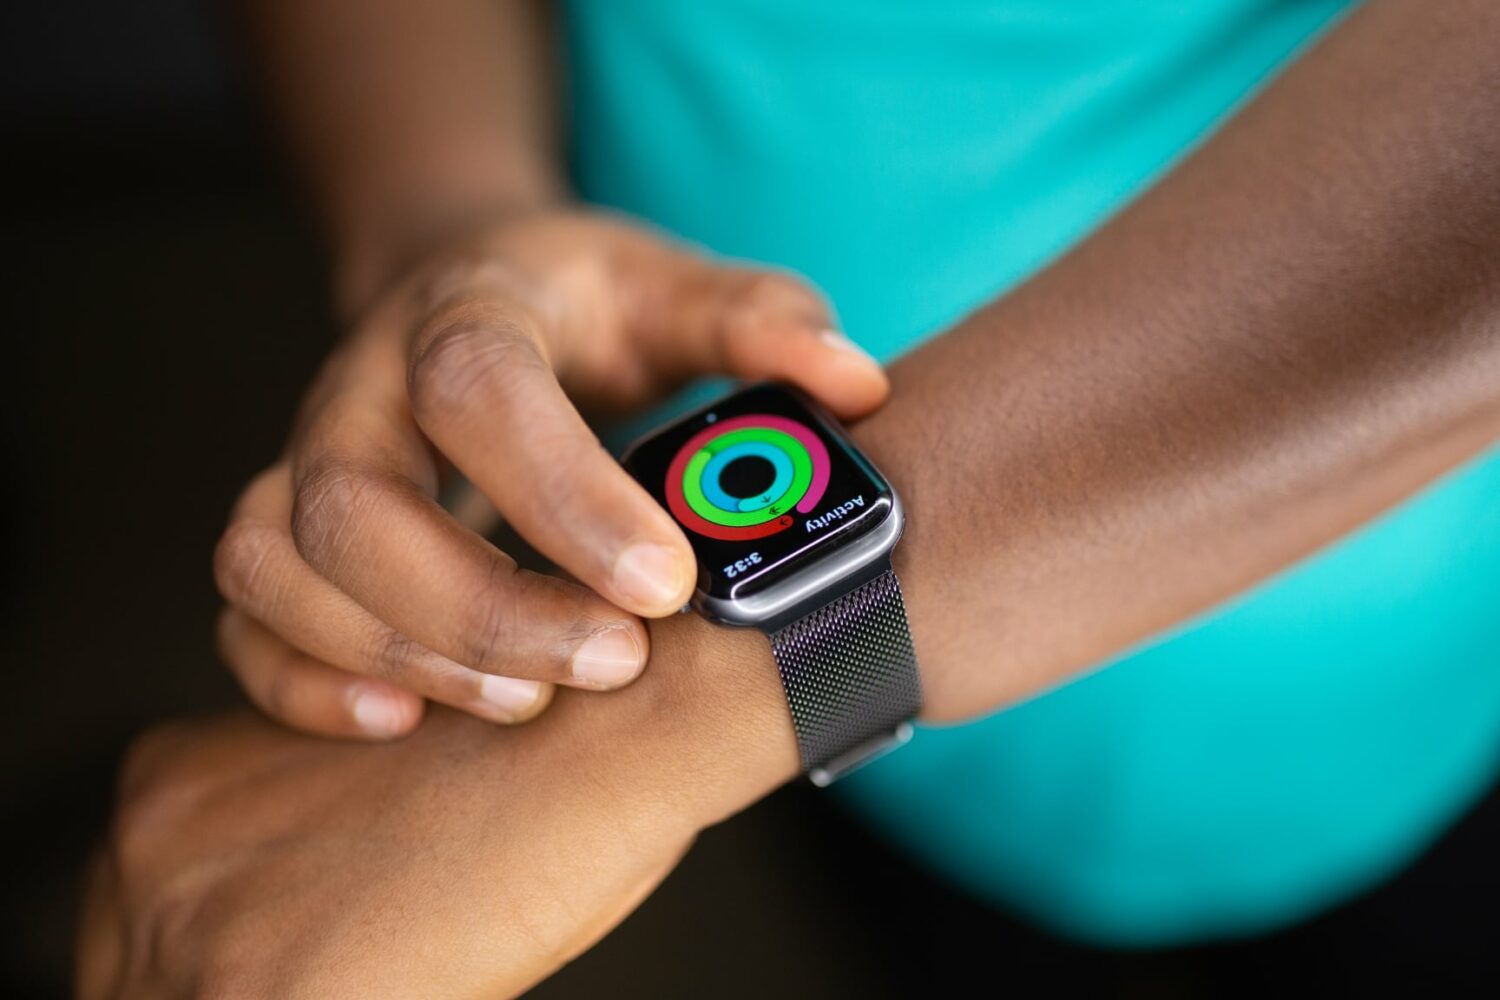 A closeup photograph of a female athlete's hand wearing an Apple Watch showing the Move, Exercise and Stand rings nearly closed